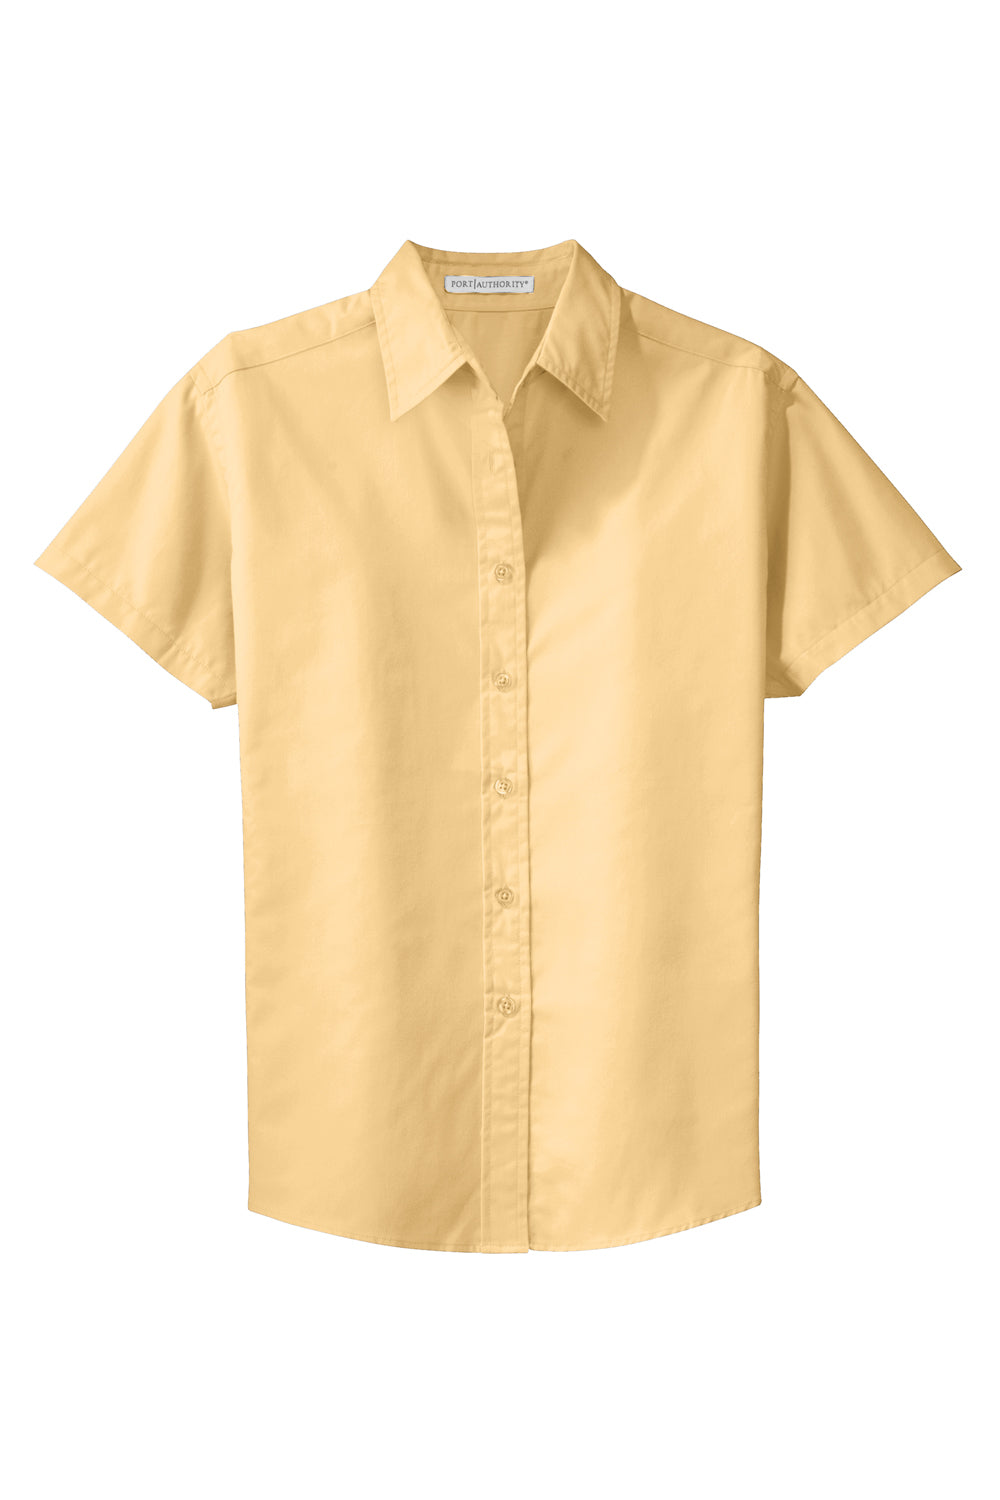 Port Authority L508 Womens Easy Care Wrinkle Resistant Short Sleeve Button Down Shirt Yellow Flat Front